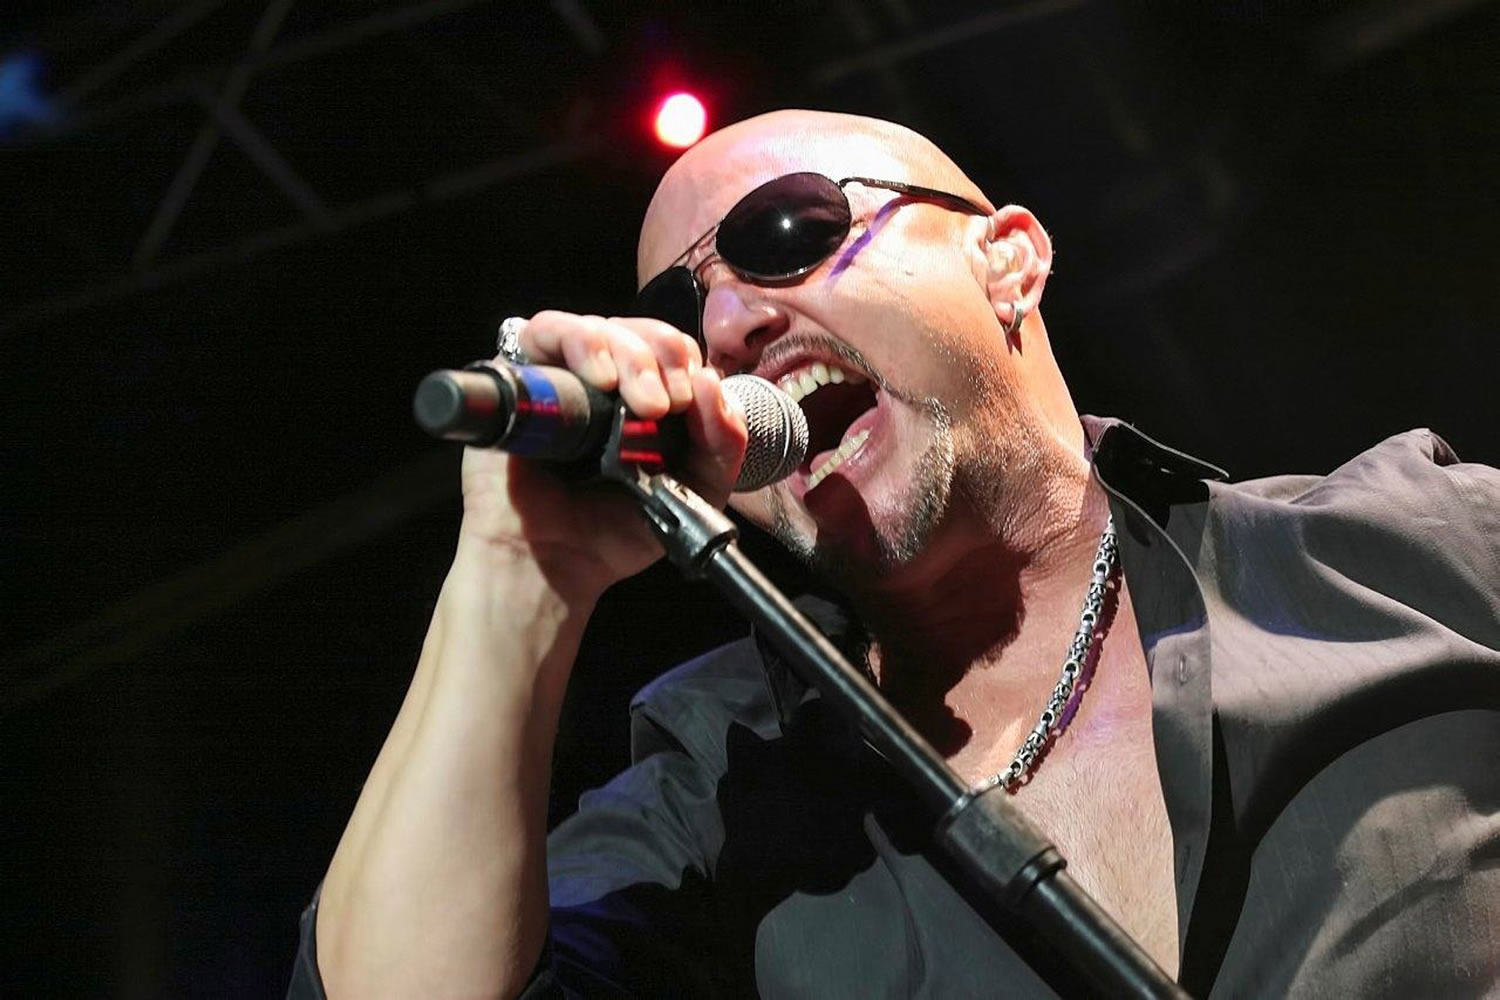 Singer-musician Geoff Tate, best known for his role in the progressive metal band Queensryche, will perform June 14 at the Aladdin Theater in Portland.